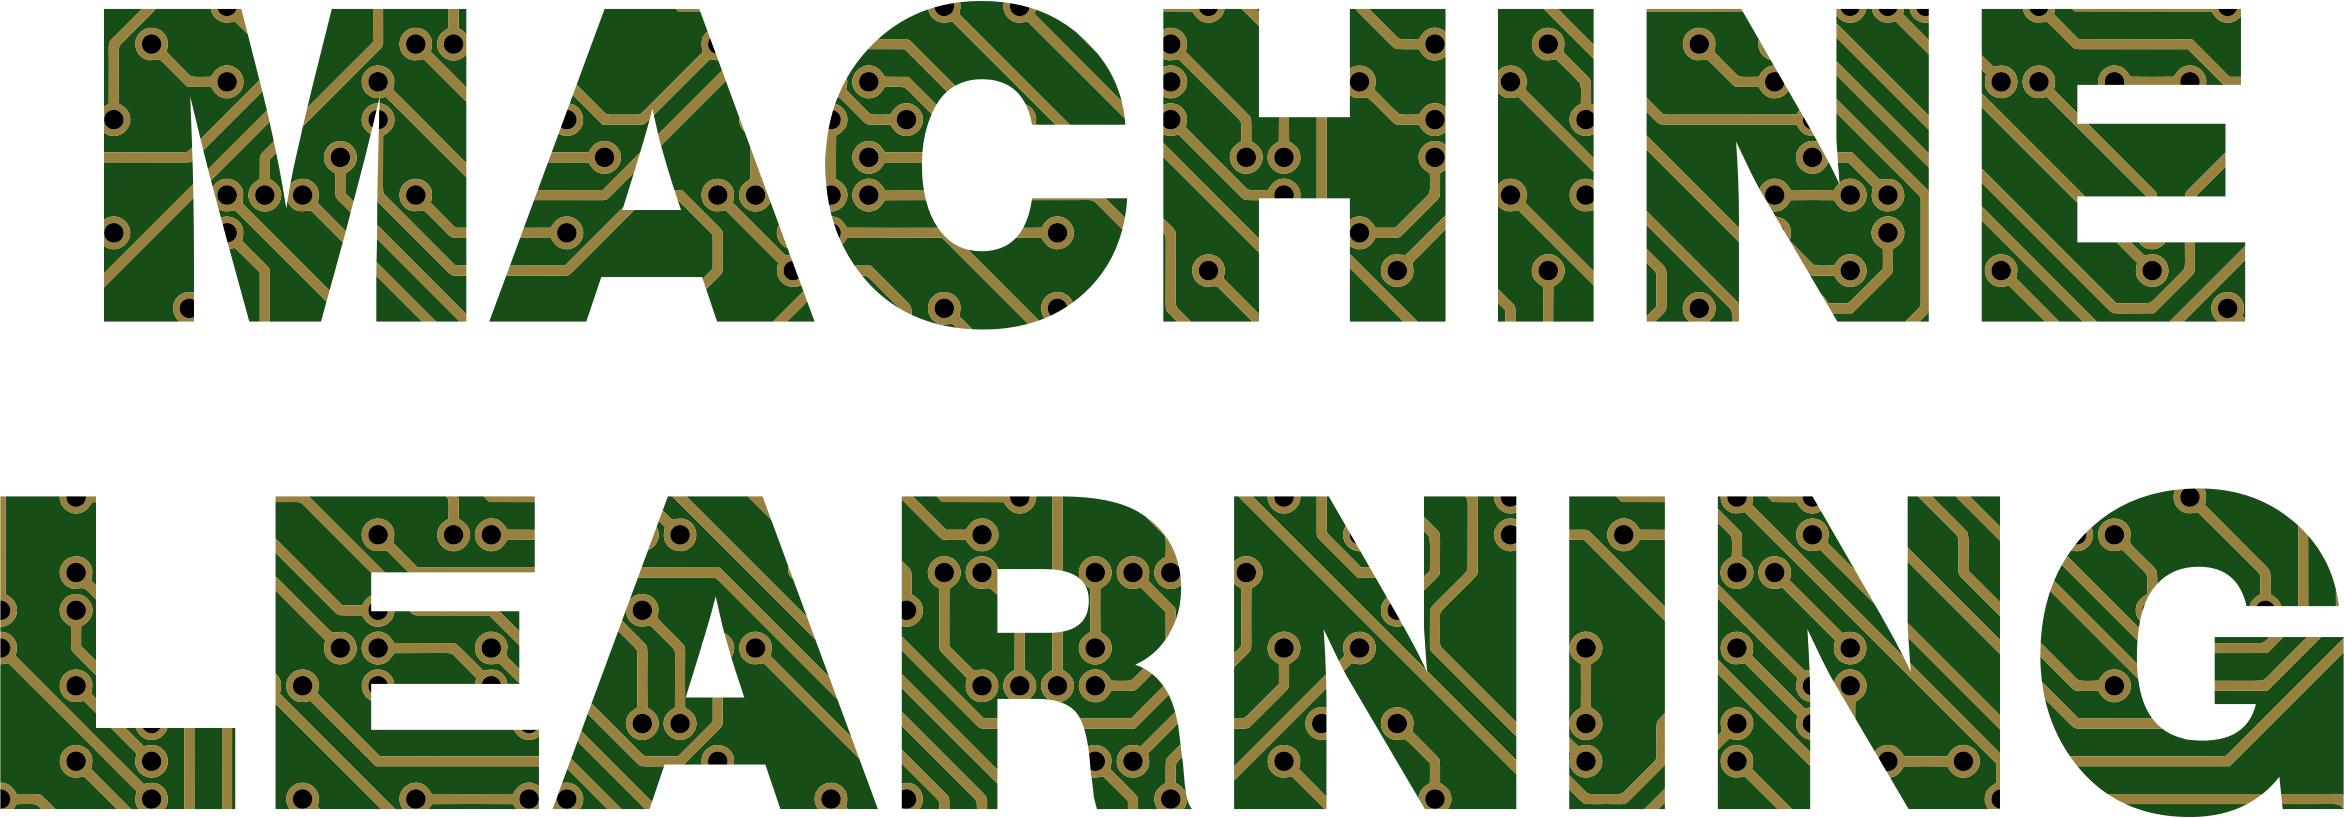 Machine Learning png